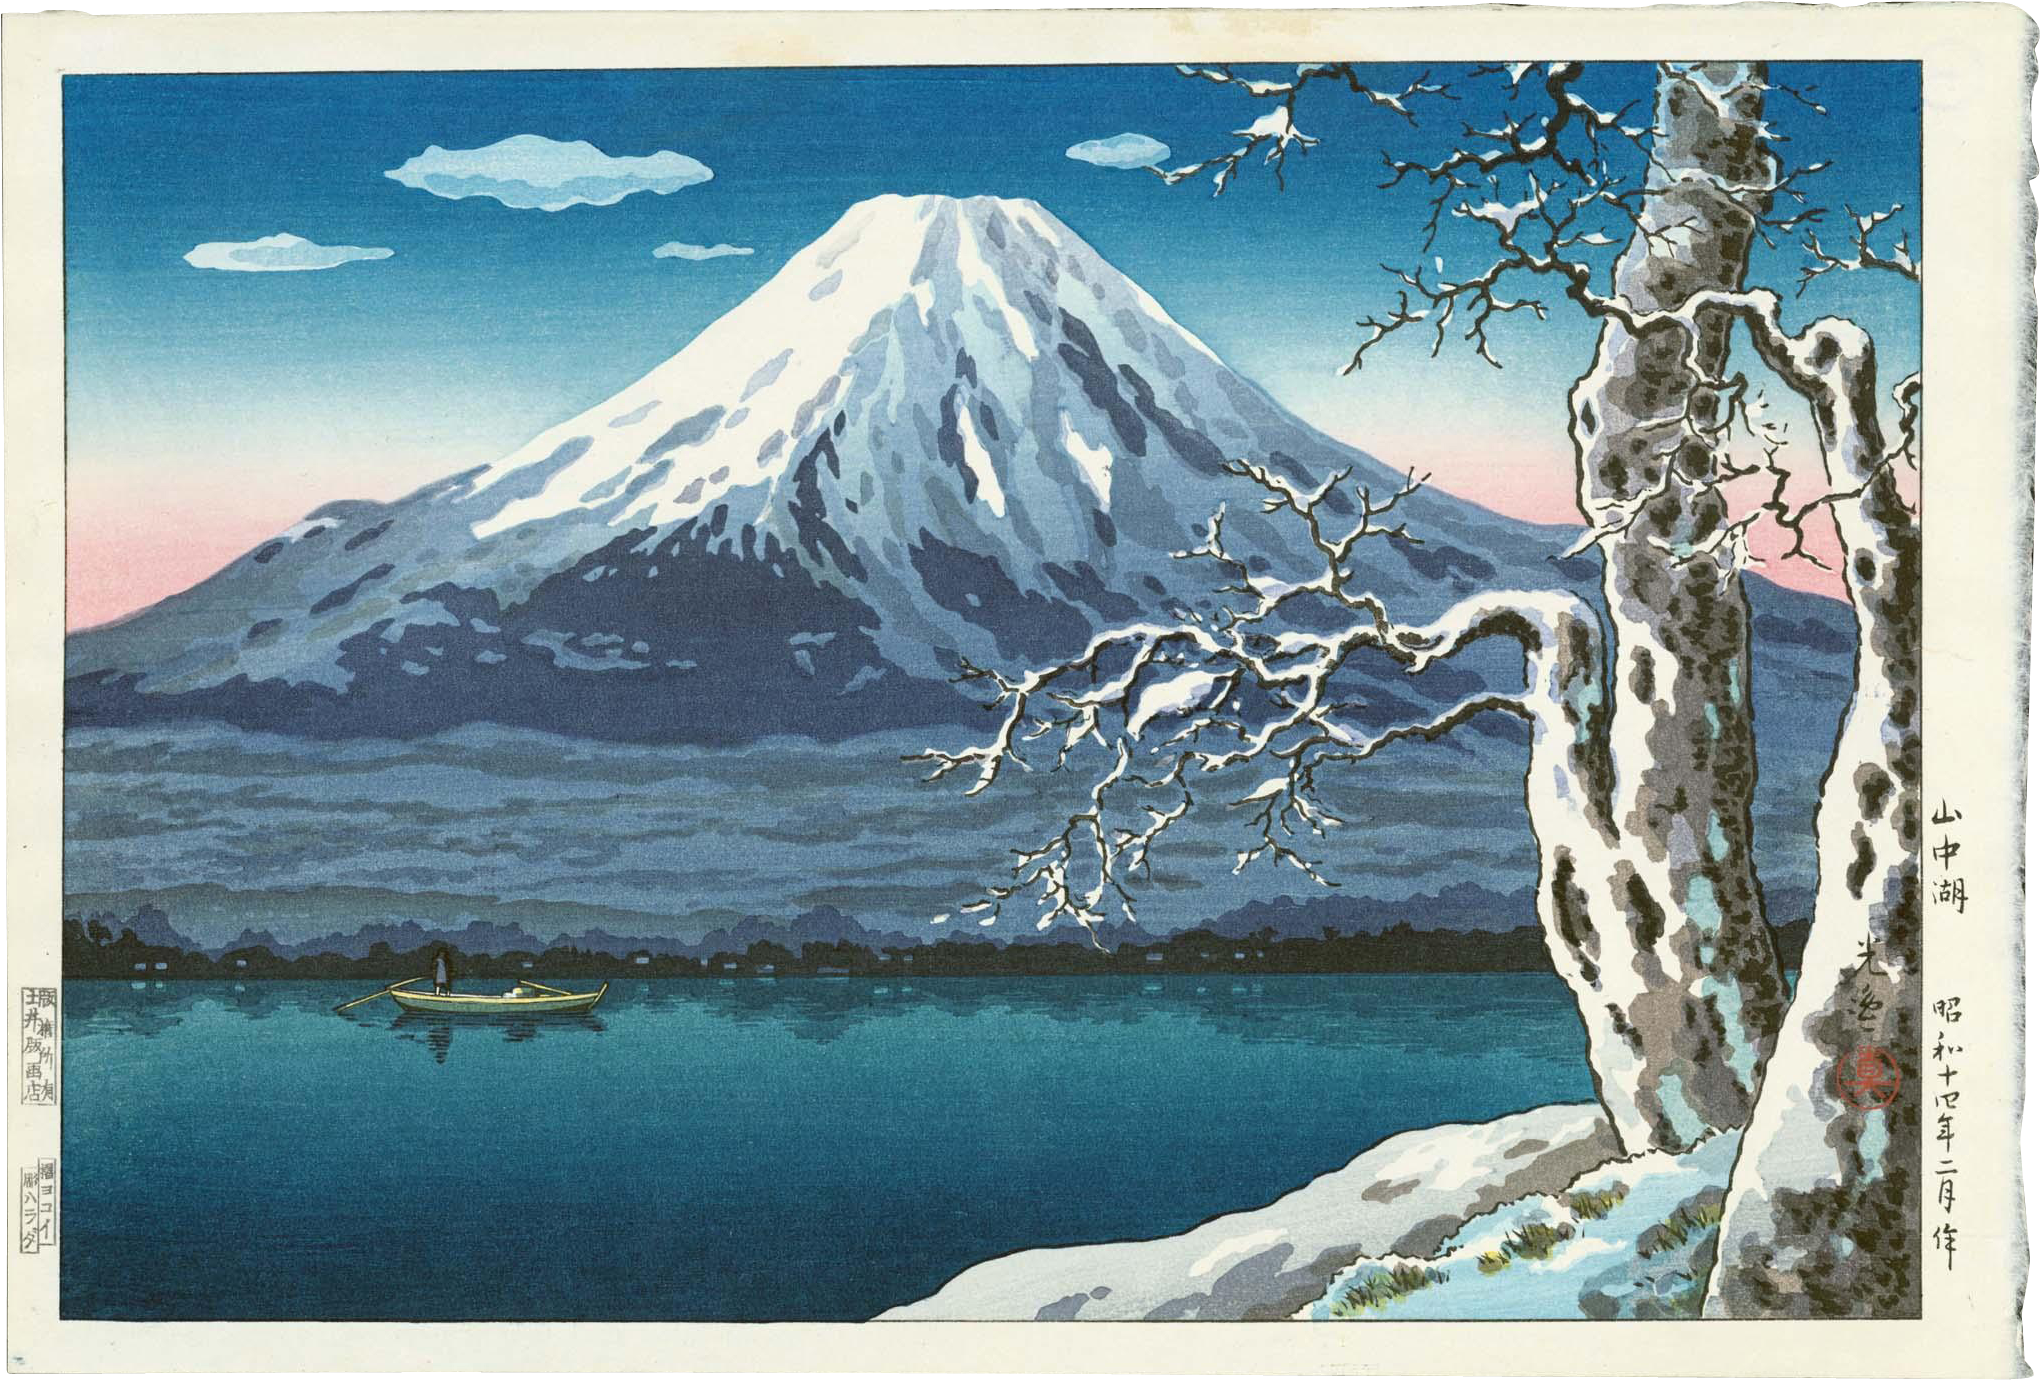 A Snow Covered Tree Next To Mount Fuji